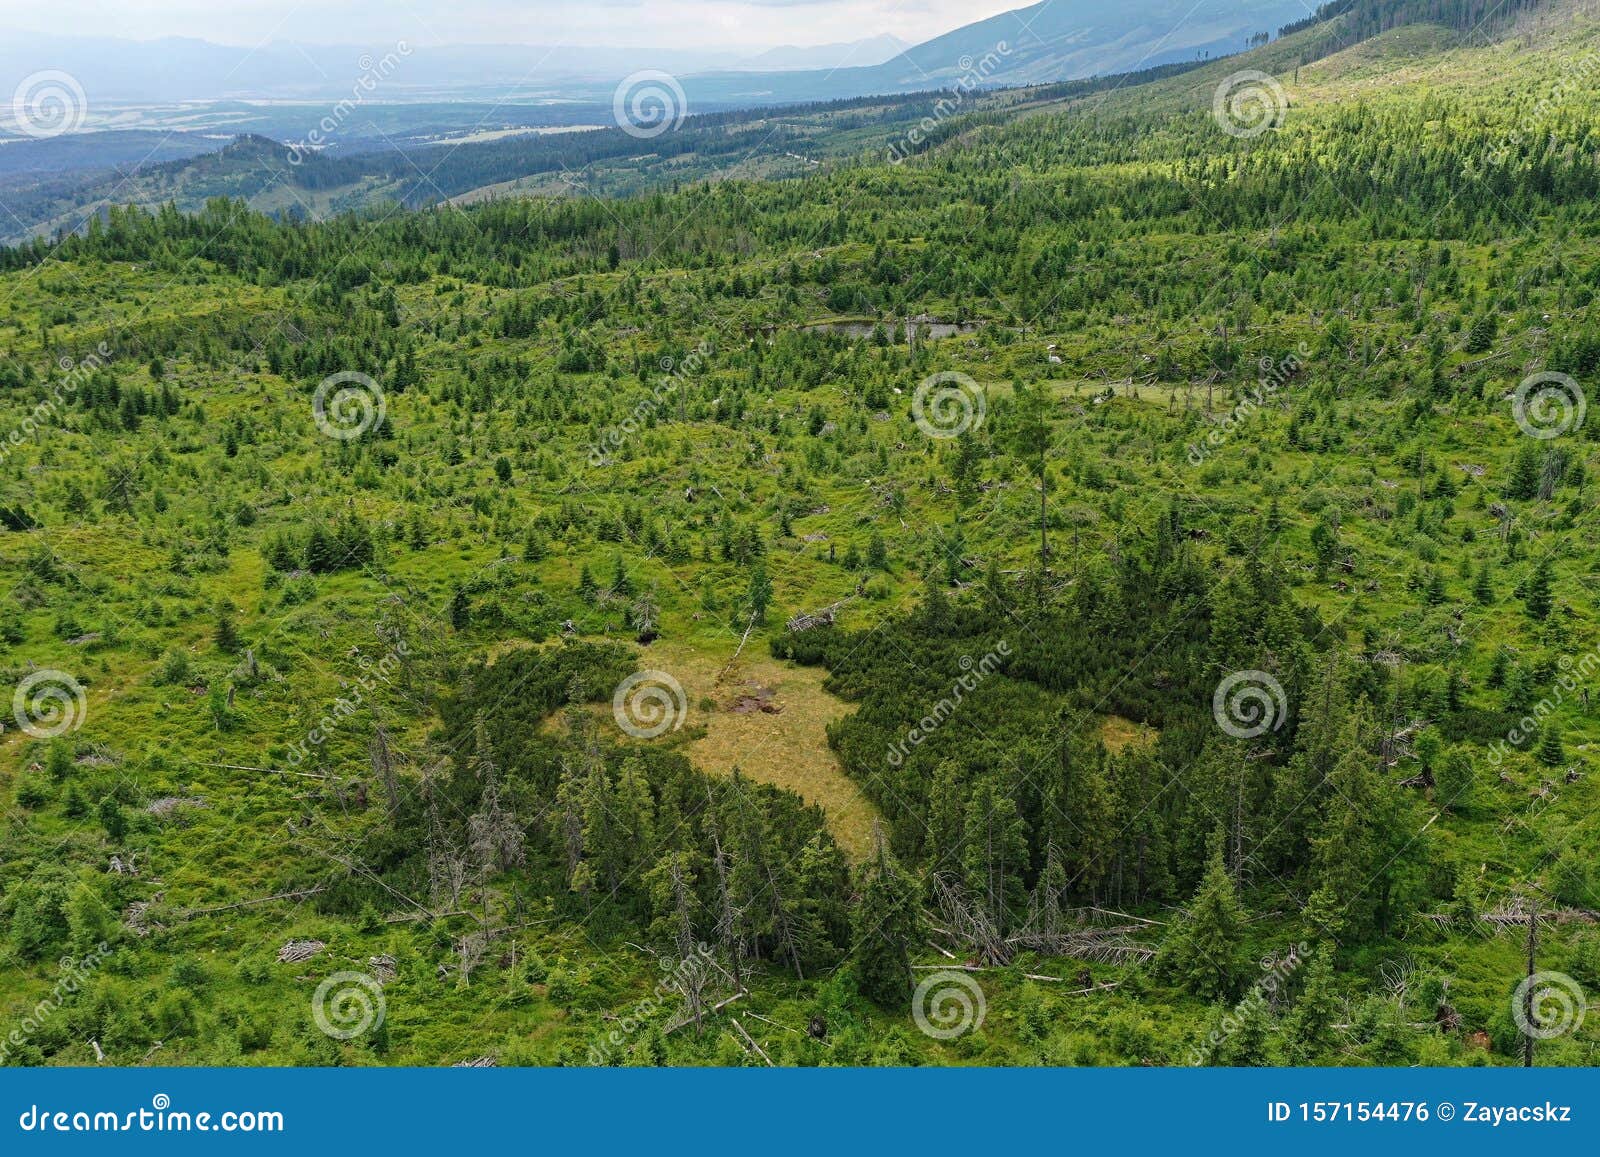 aerial view of coniferous mountain forest in vysoke tatry mountains, slovakia, recovering after disastrous windstorm slash.